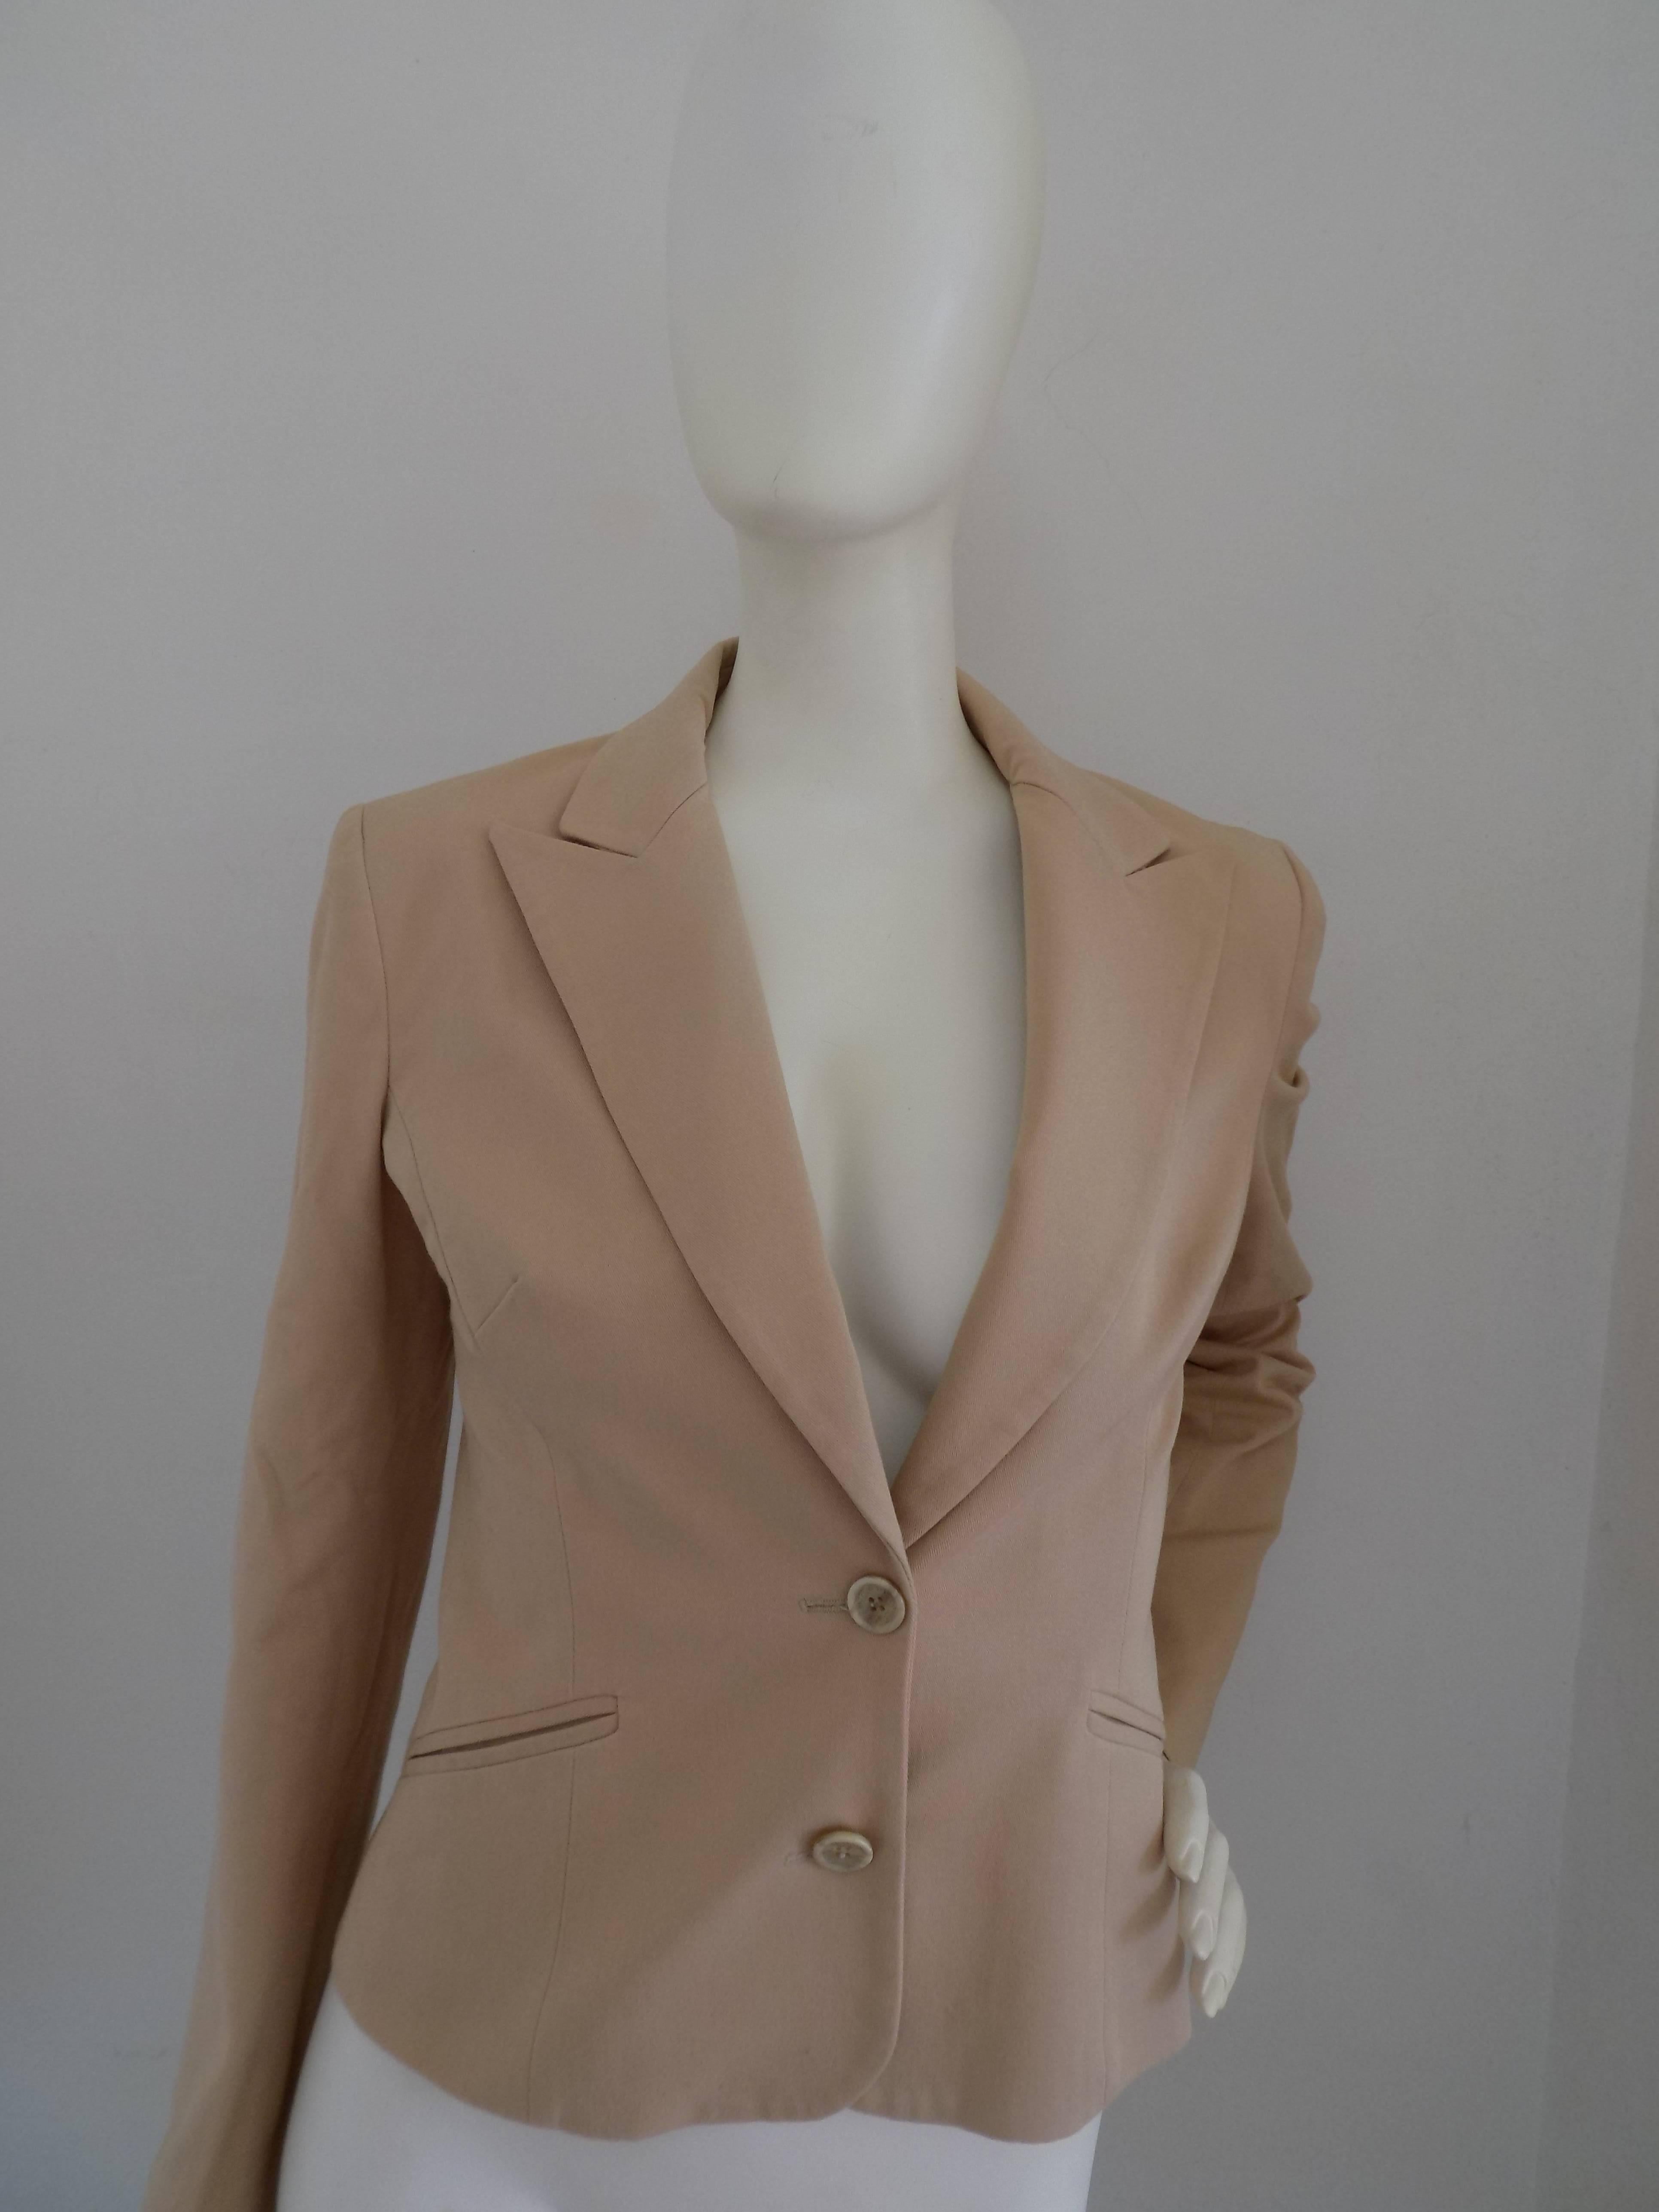 D&G Beije Cotton Jacket
Totally made in italy in italian size range 40

Composition: Cotton
